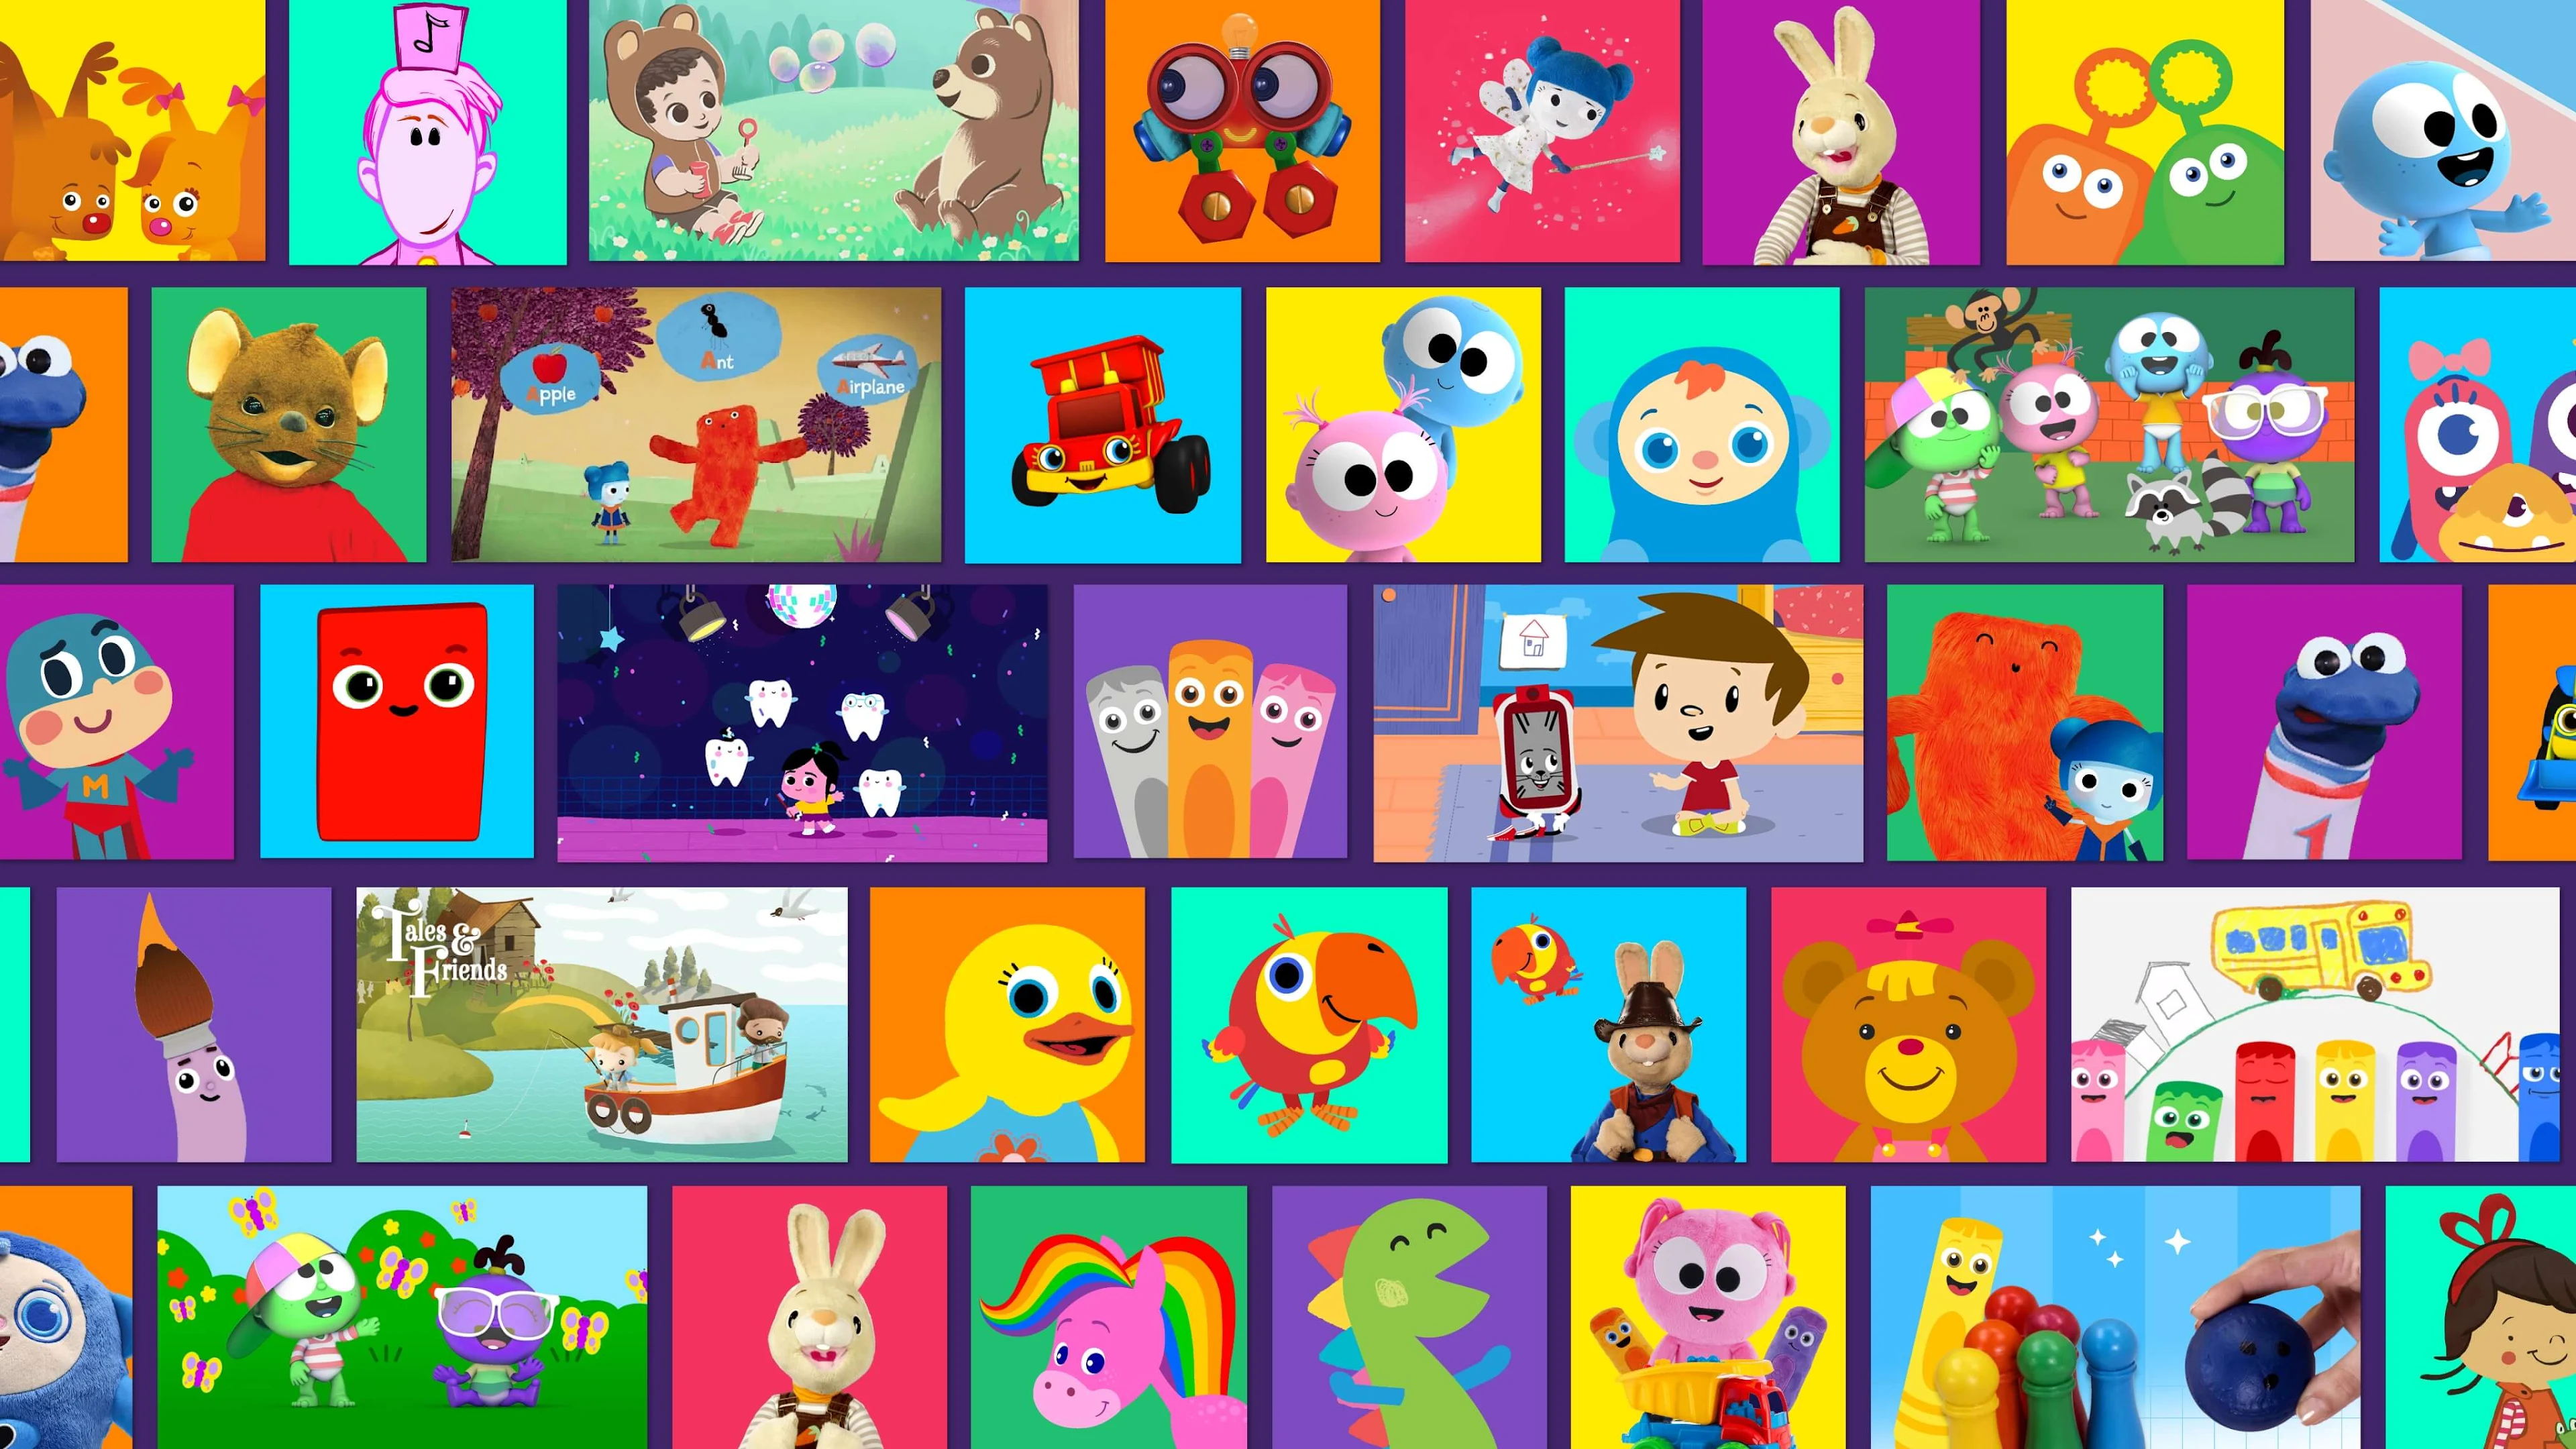 Baby Phone for Toddlers Games - Apps on Google Play